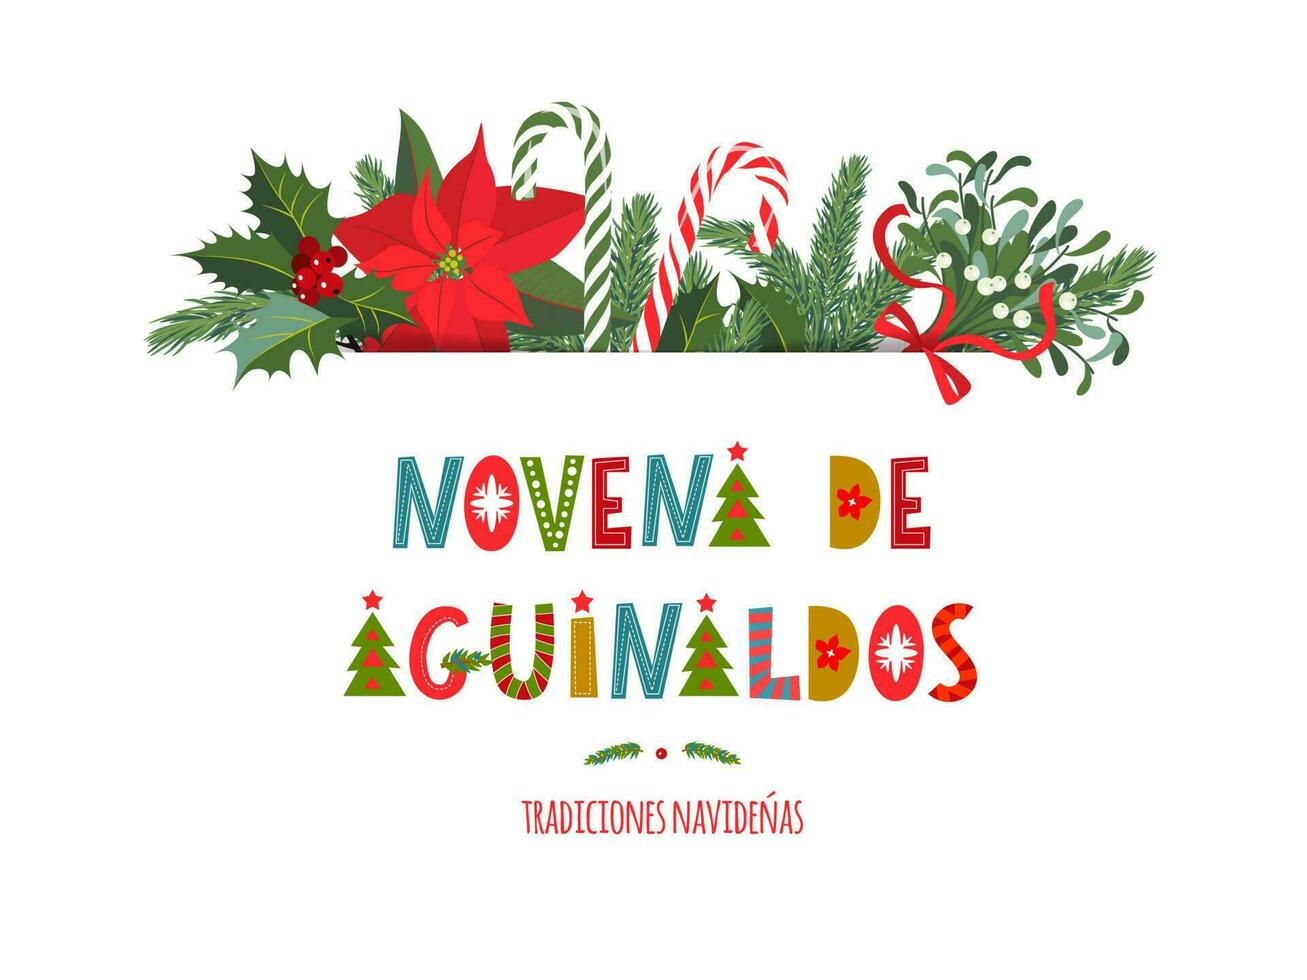 Novena de aguinaldos - Ninth of Bonuses spanish text, It is a Christmas Catholic tradition in Colombia - latin american vector